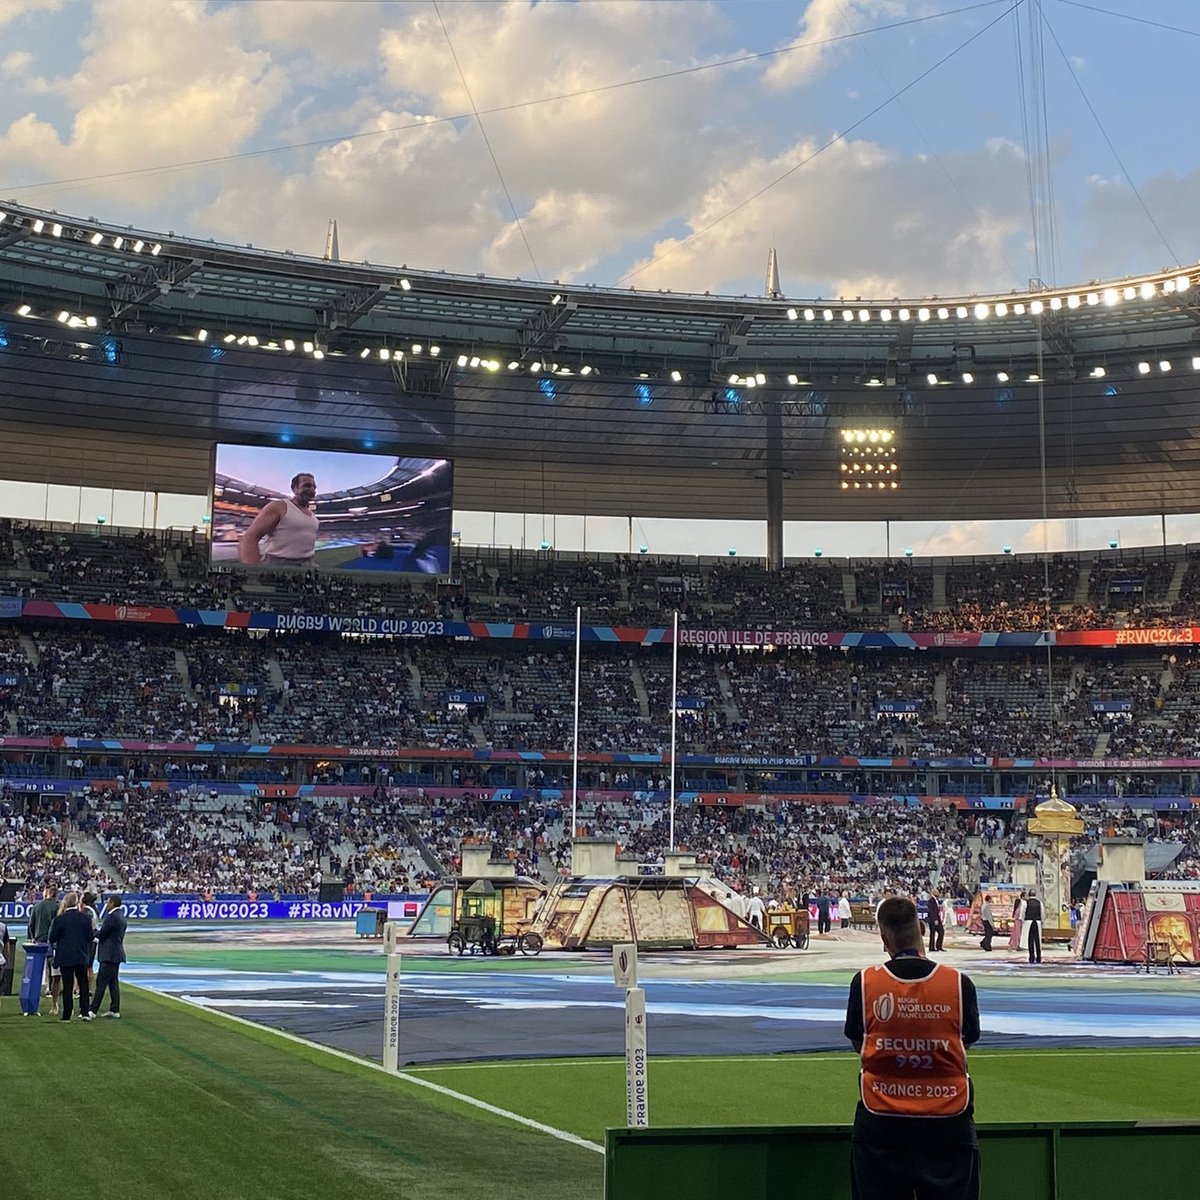 The atmosphere is building ahead of the first game of the @rugbyworldcup 🇫🇷 #AELive #RWC2023 🏉